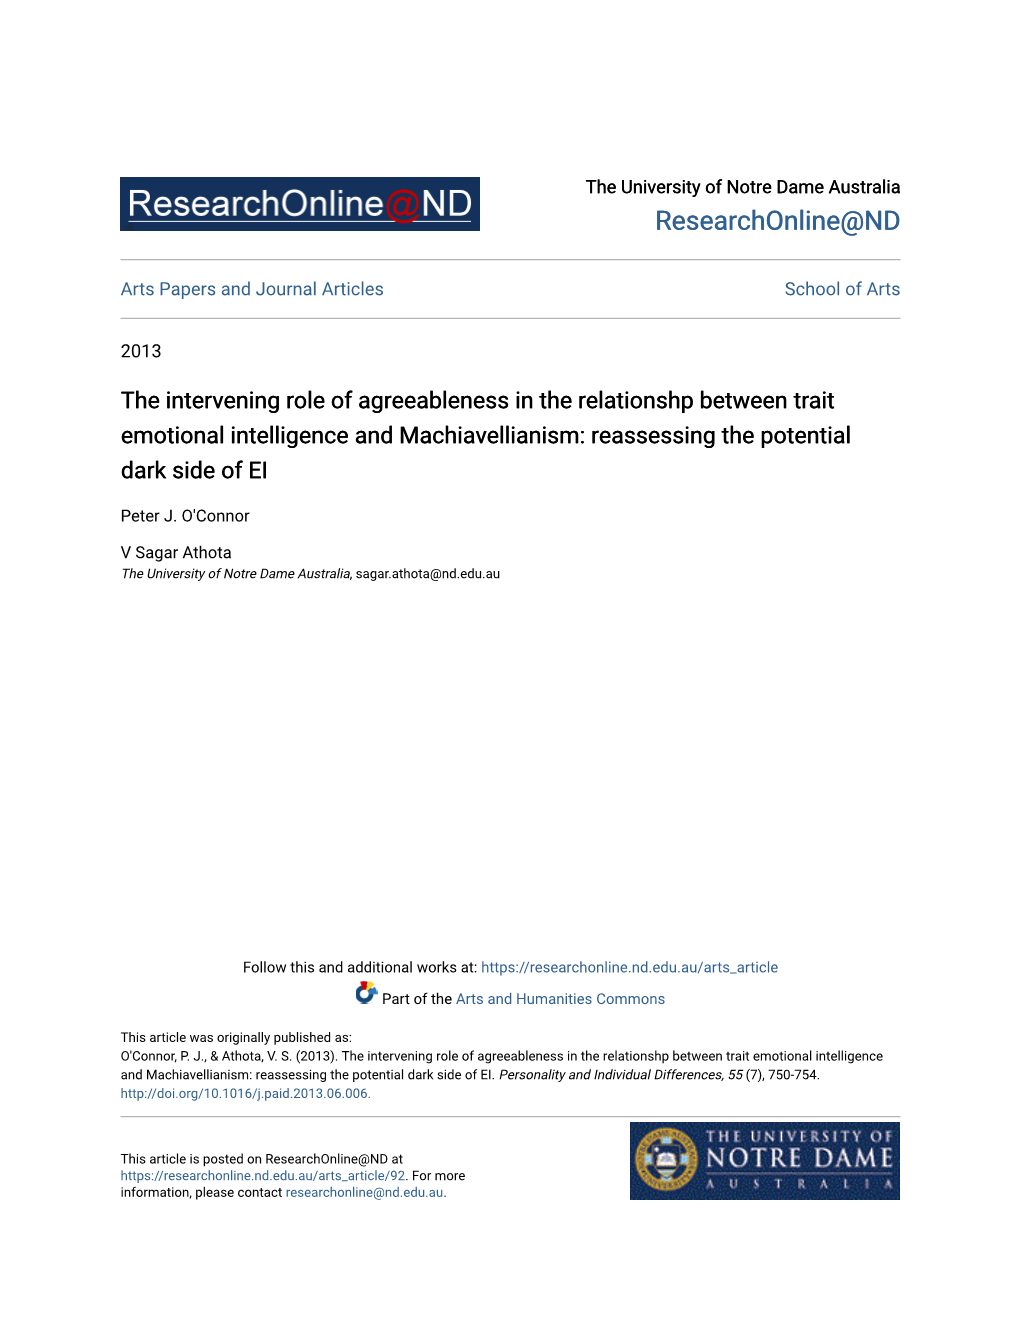 The Intervening Role of Agreeableness in the Relationshp Between Trait Emotional Intelligence and Machiavellianism: Reassessing the Potential Dark Side of EI